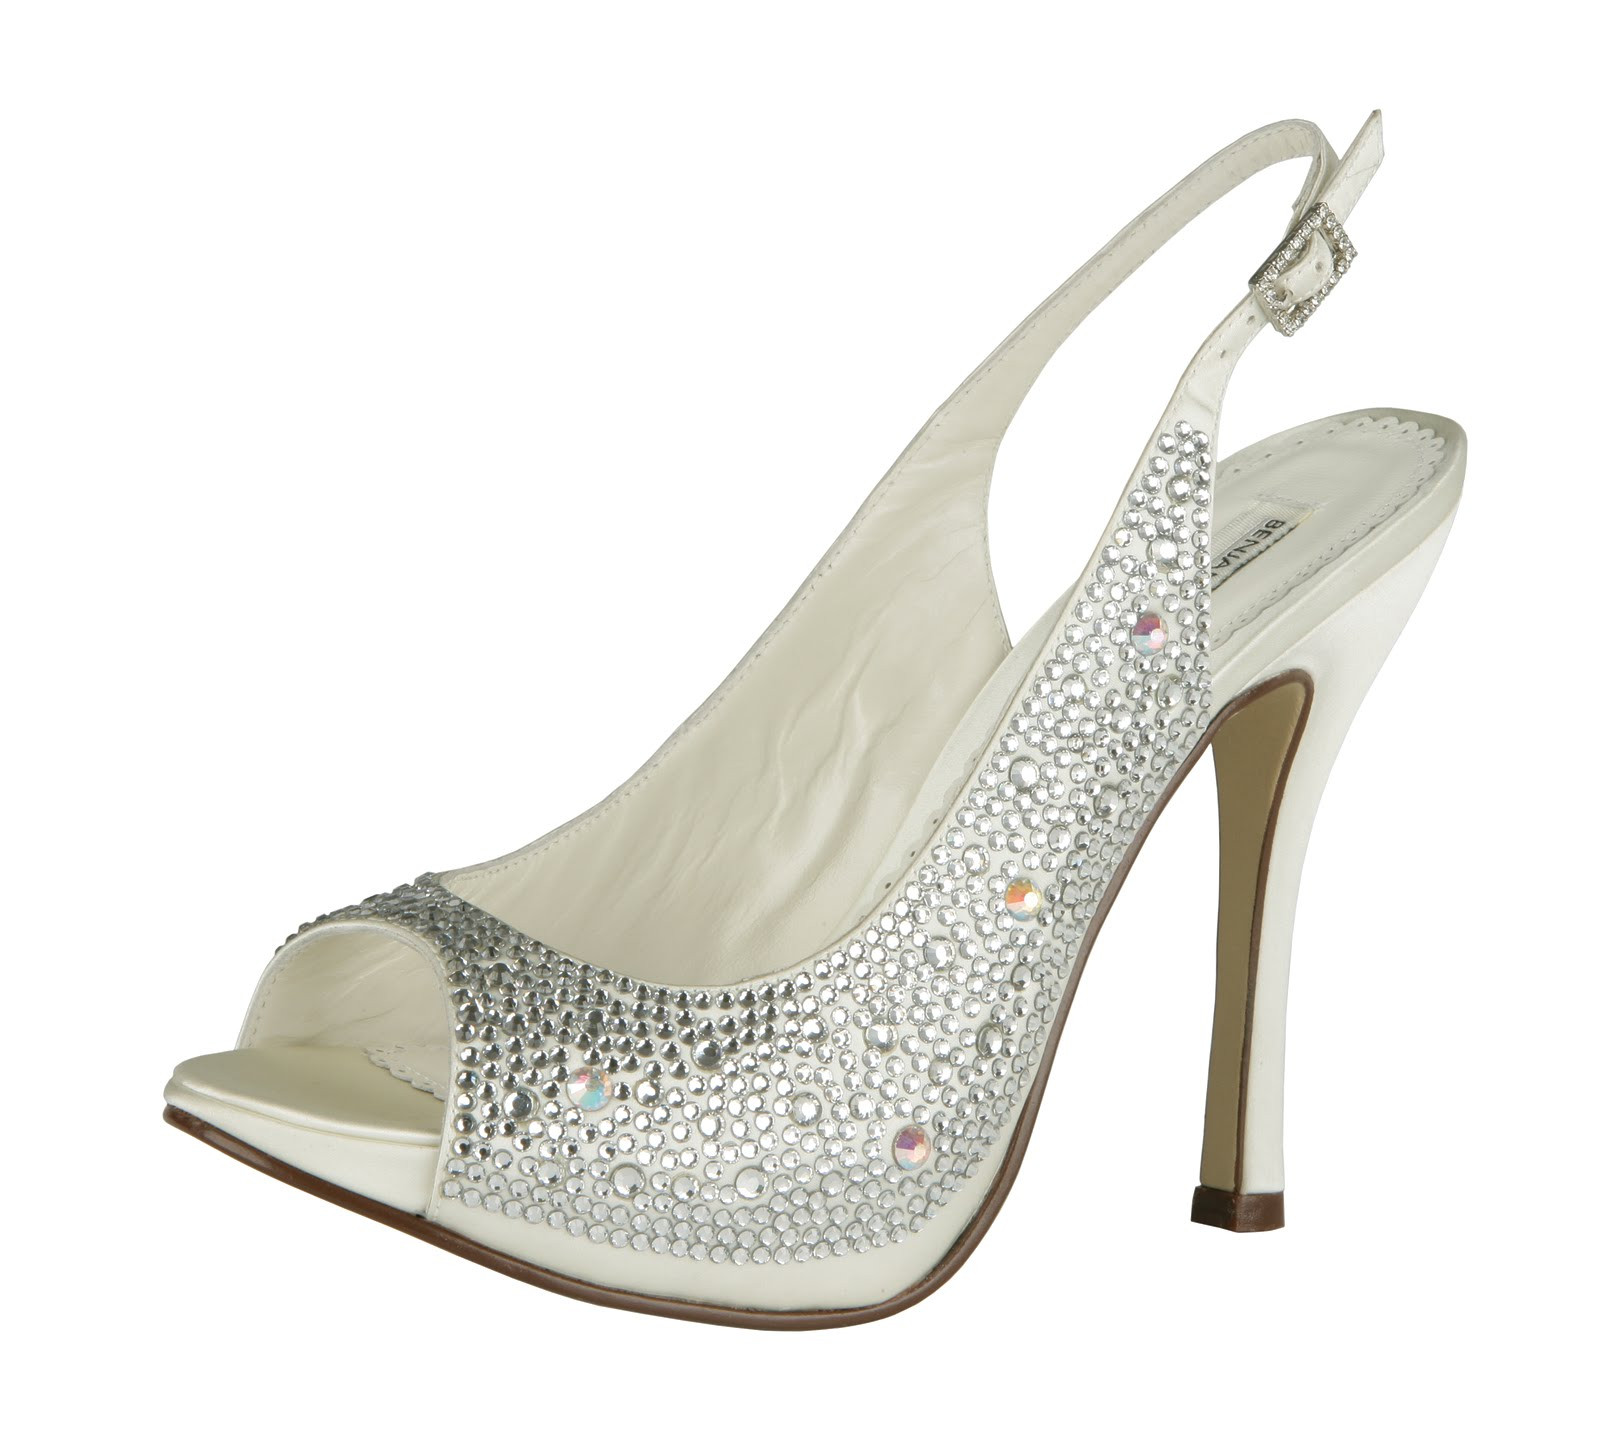 Crystal Wedding Shoes
 Everything But The Dress All Crystal Bridal Shoes by